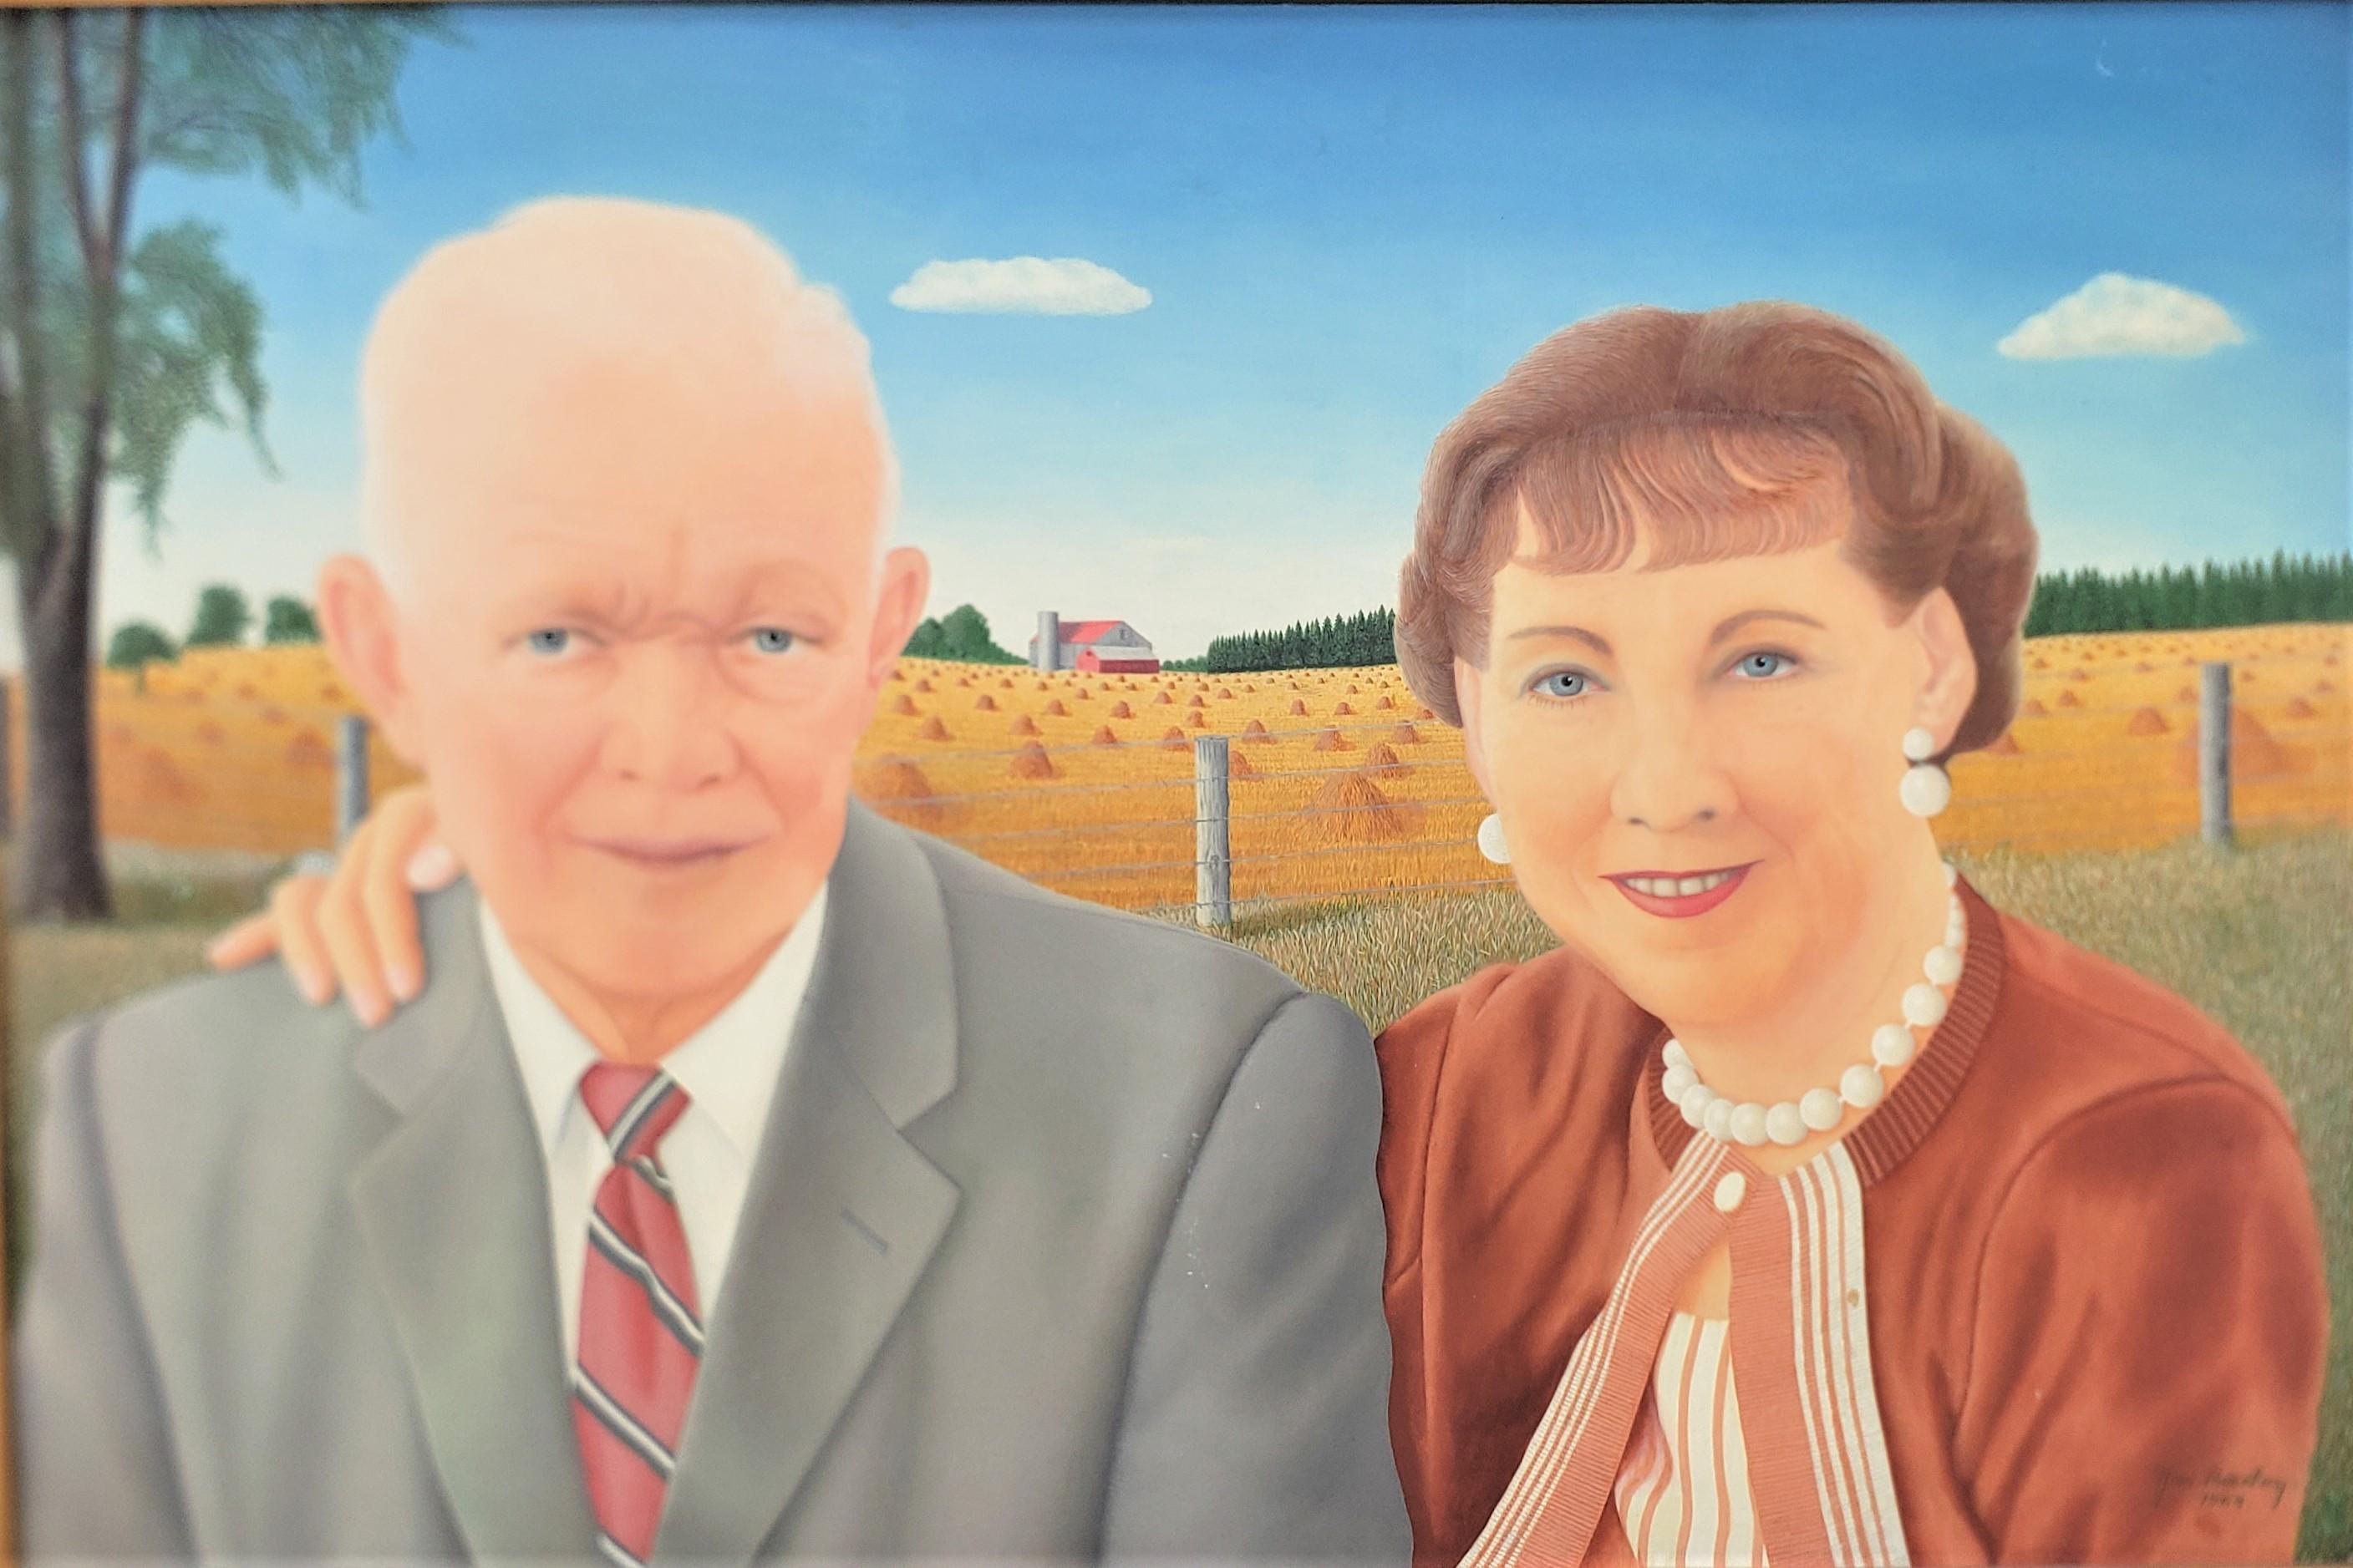 This large and well executed original watercolor painting on masonite board is signed by a Jim Barclay, presumably from the United States, dating to 1964 and done in a period folk art style. The painting depicts President and Mrs. Dwight Eisenhower